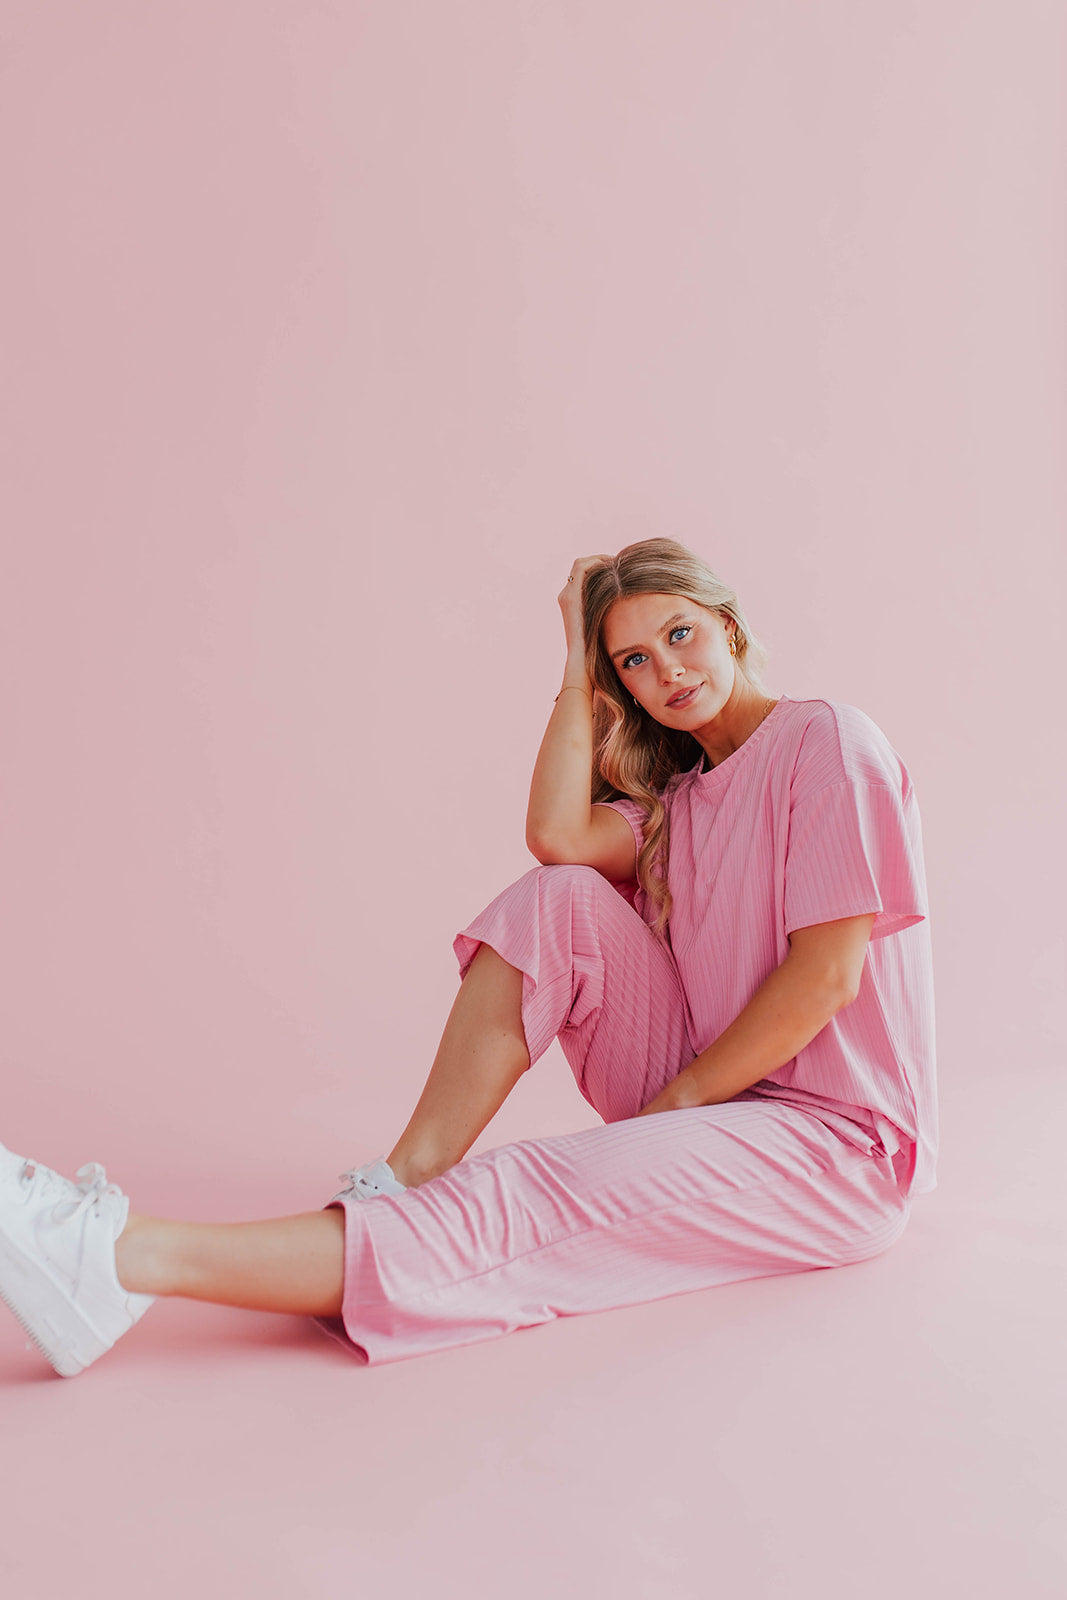 THE RYLIE RIBBED WIDE LEG SET IN BUBBLEGUM PINK BY PINK DESERT